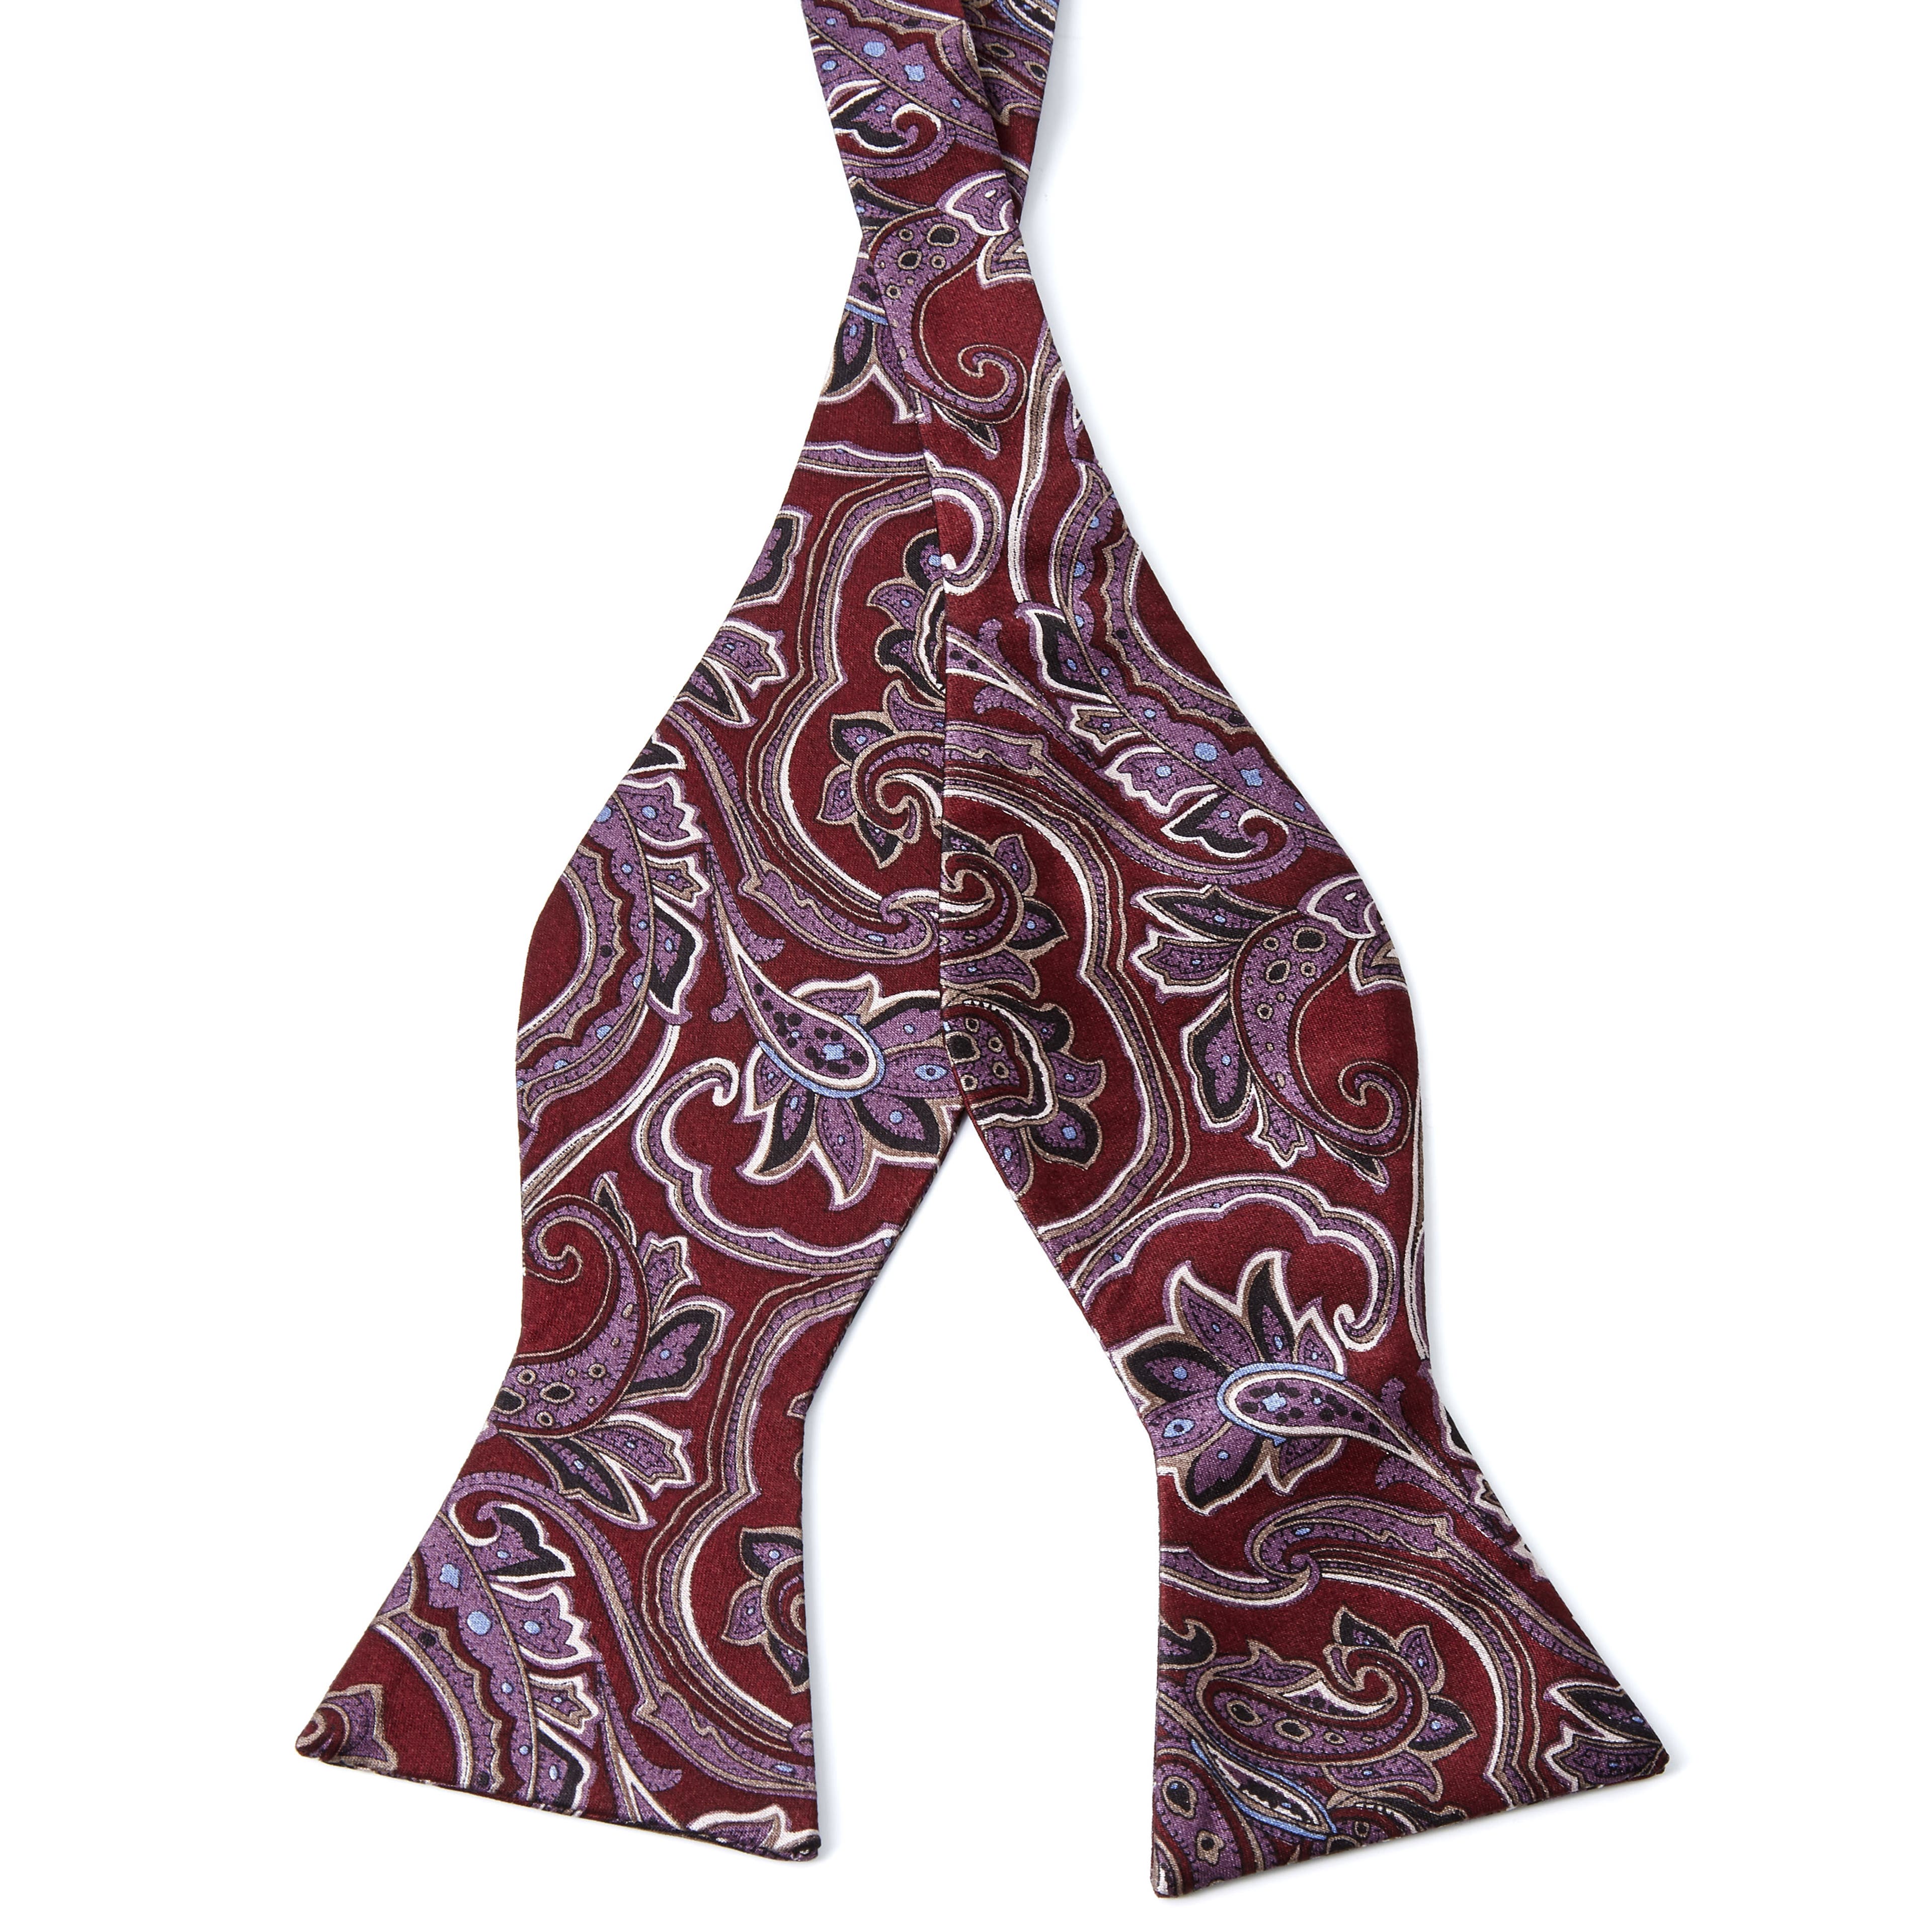 Red and Green Baroque Print Silk Self Tipped Tie | Drake's